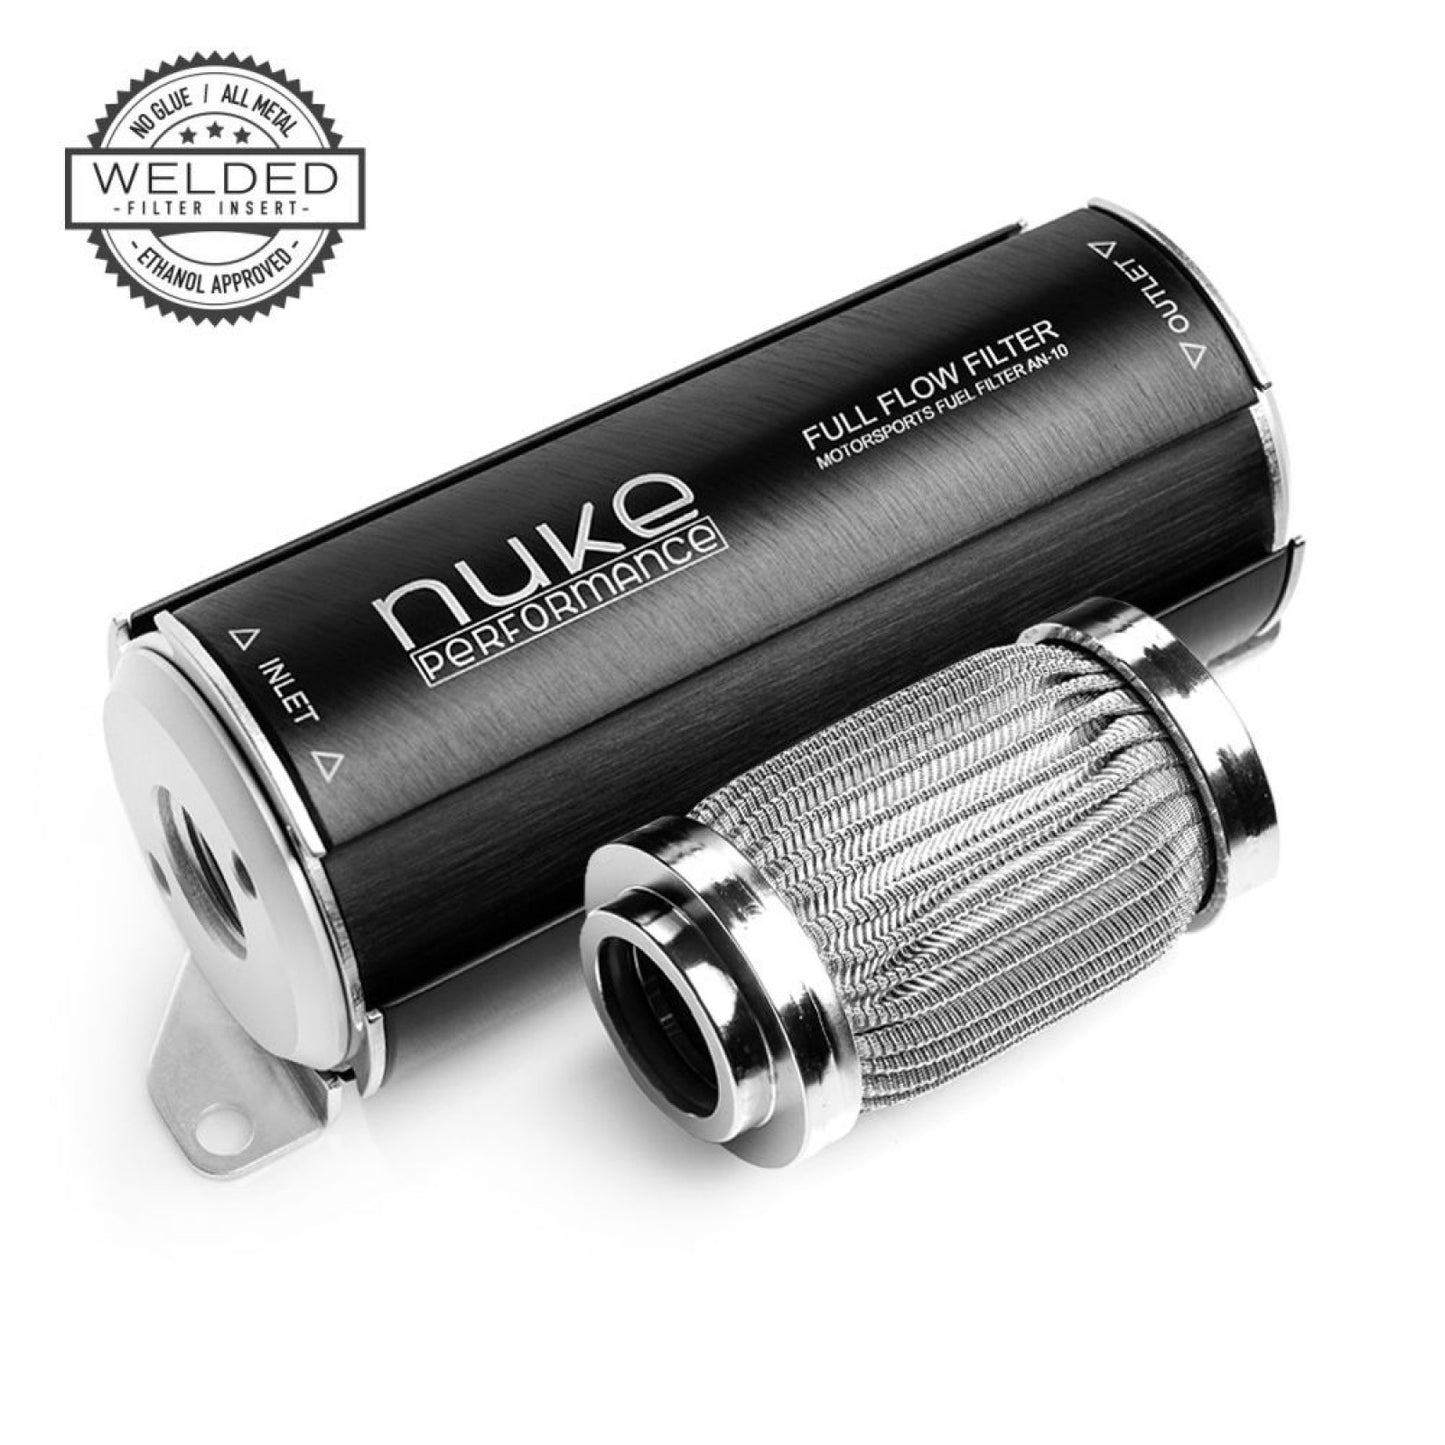 Nuke Performance Fuel Filter 100 micron AN-10 - Welded stainless steel element 200-01-202